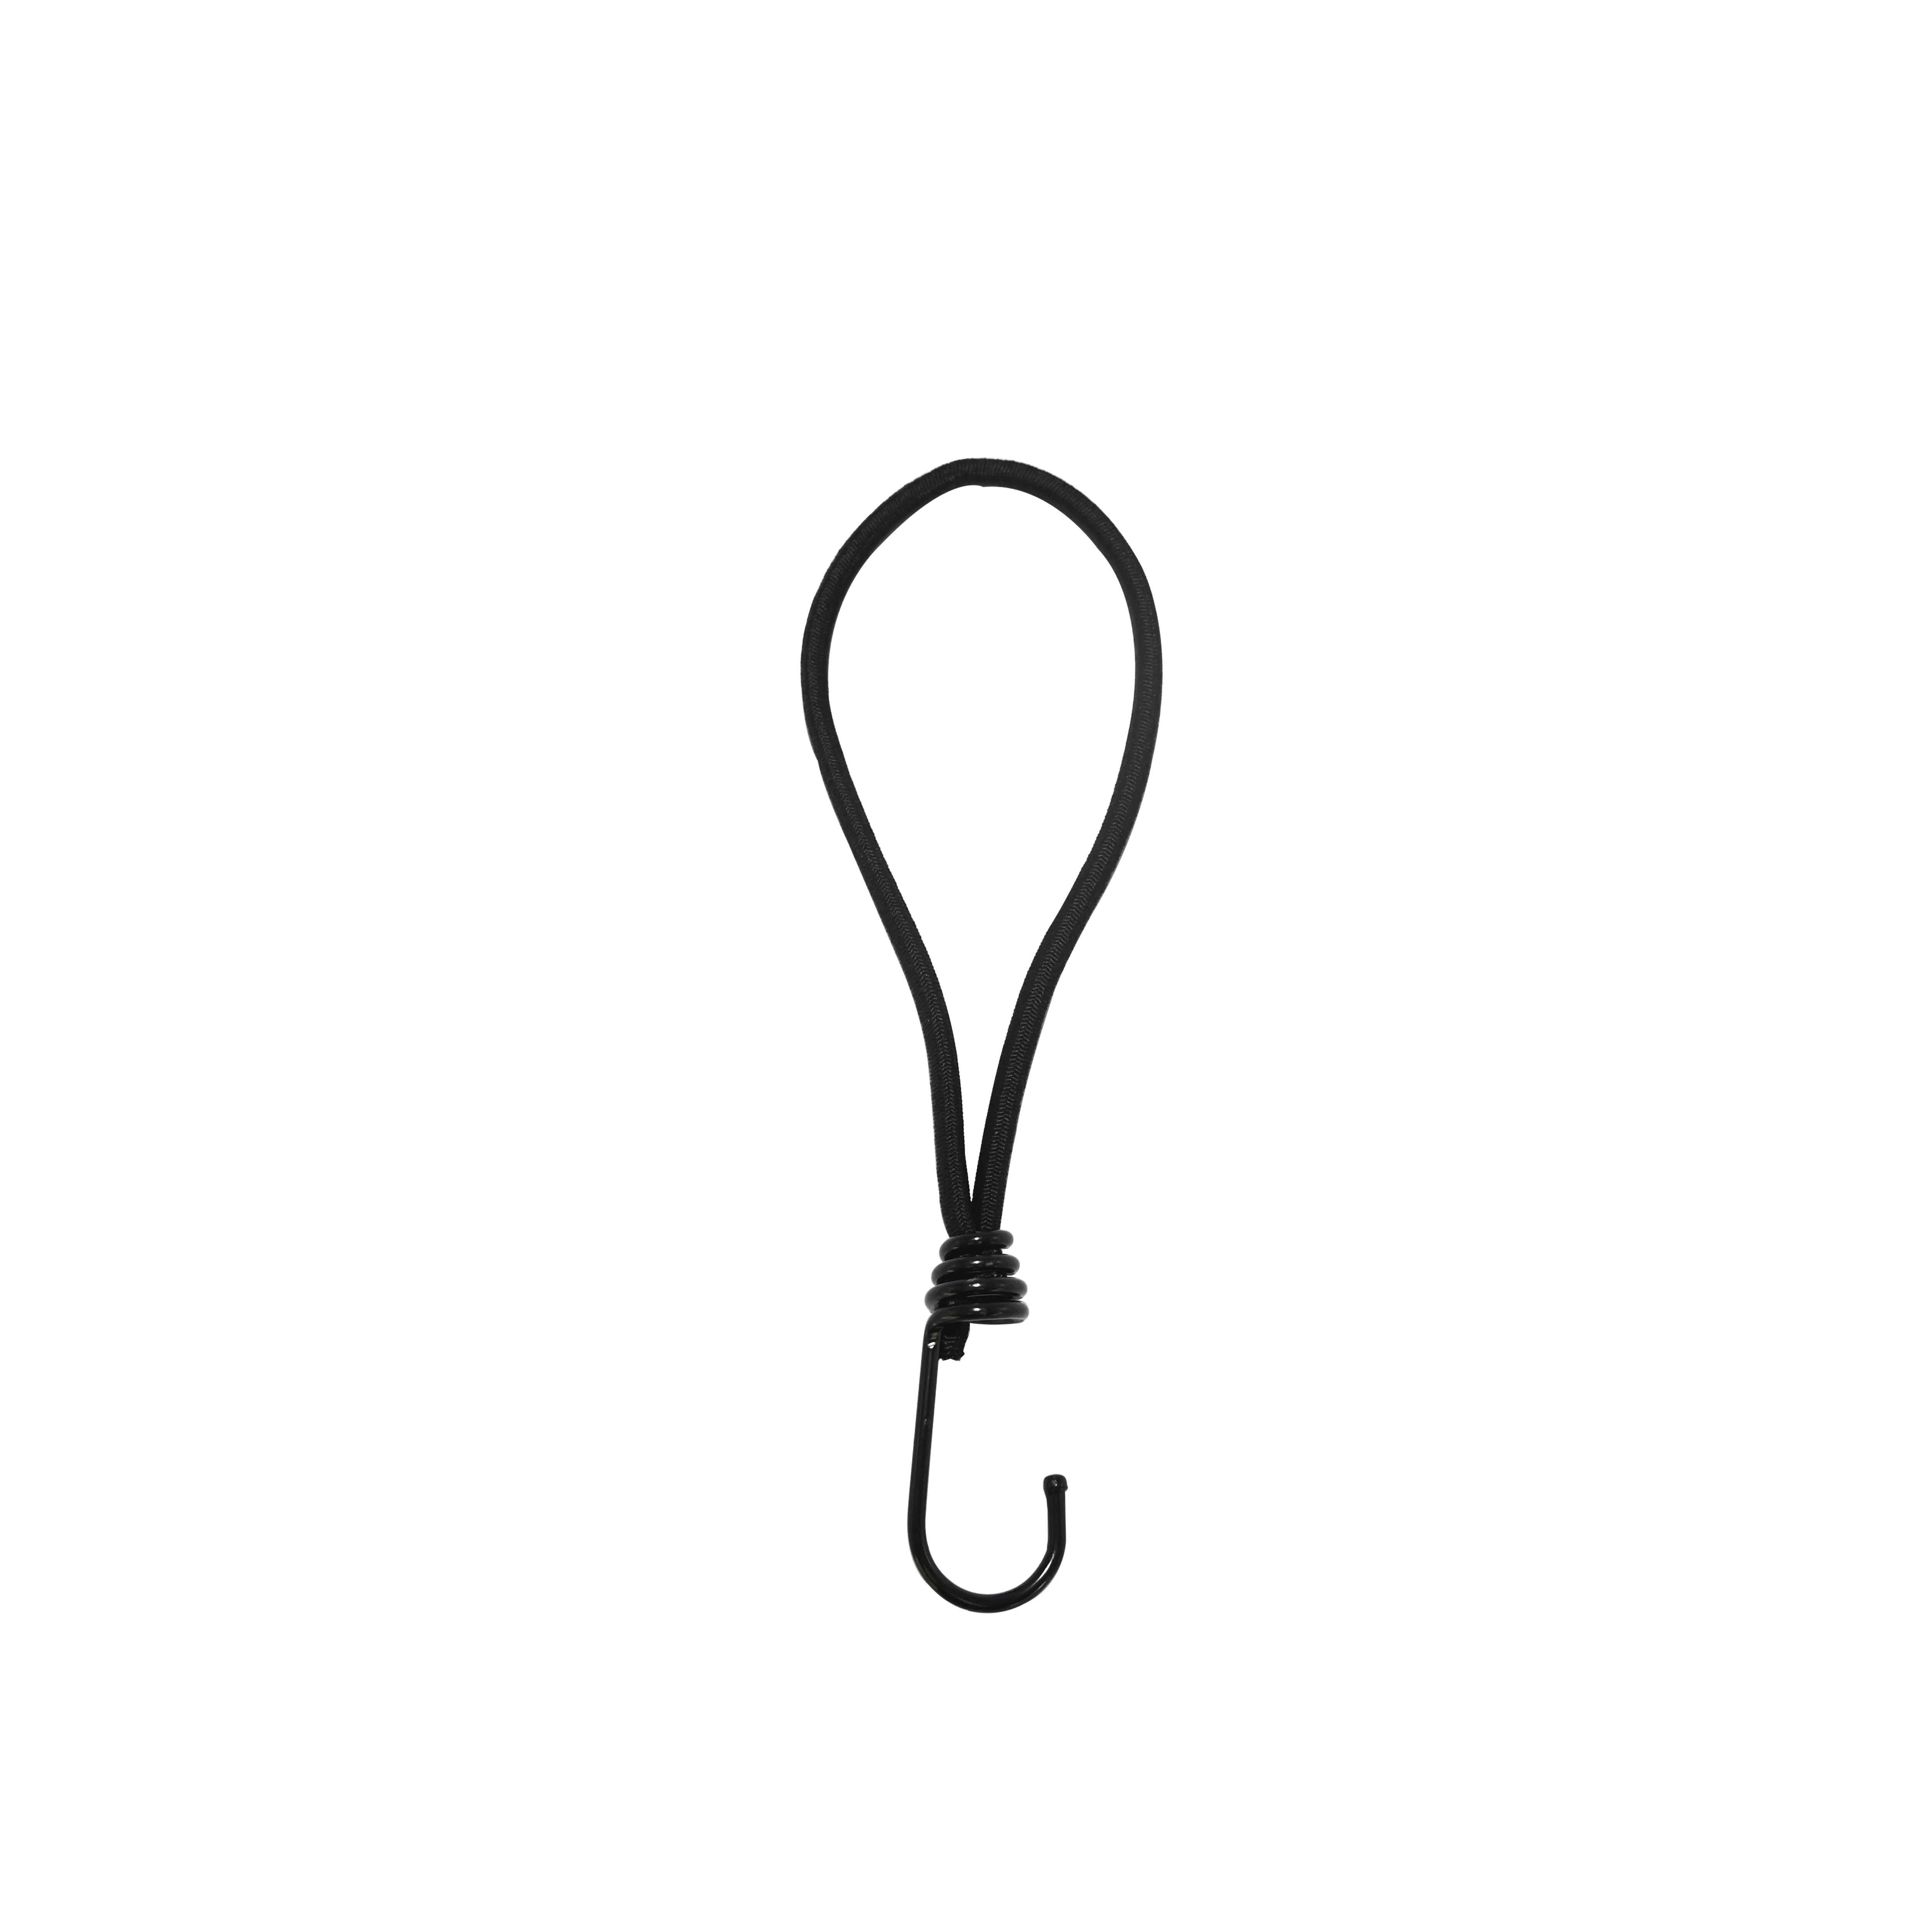 Mini Bungee Cord with Hooks- 10 Pack Heavy Duty Bungee Cords 7